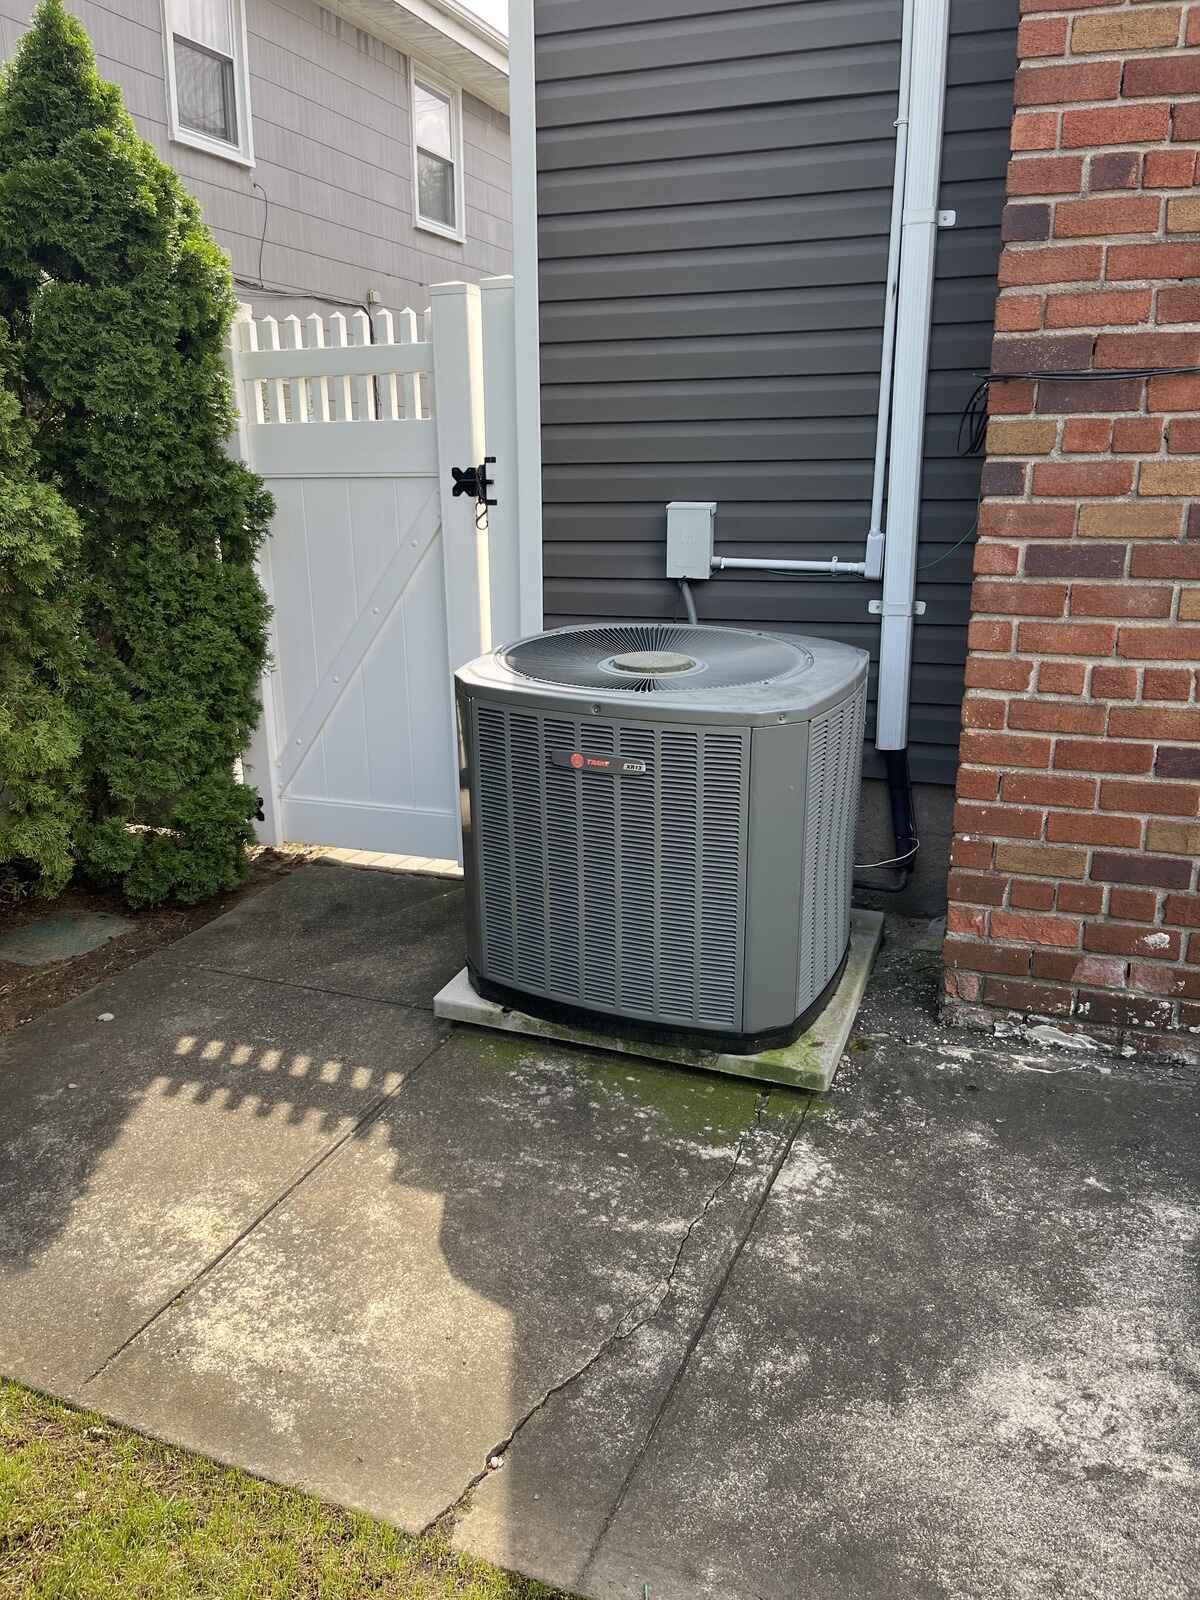 Outdoor AC unit before replacement